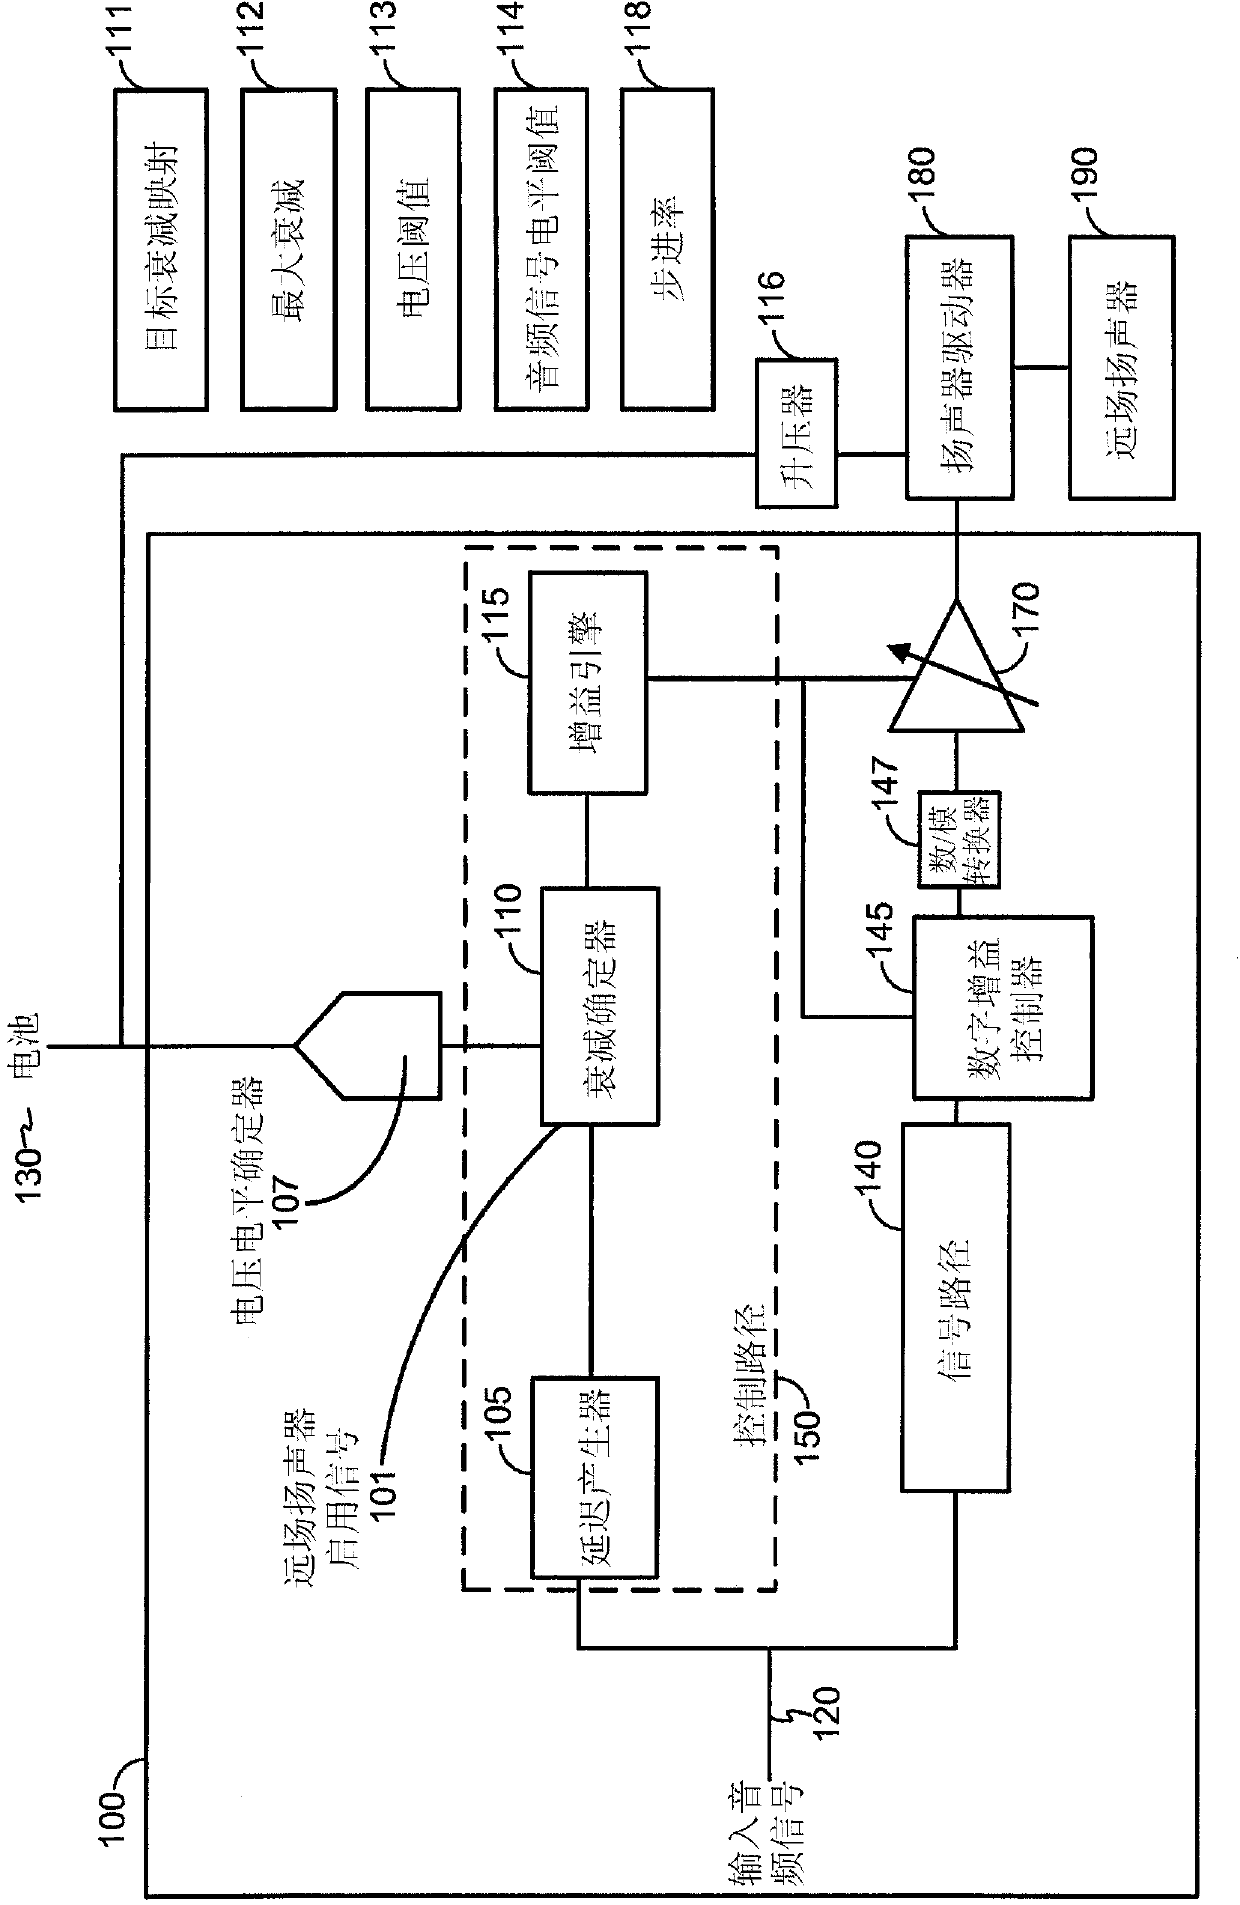 Battery power monitoring and audio signal attenuation